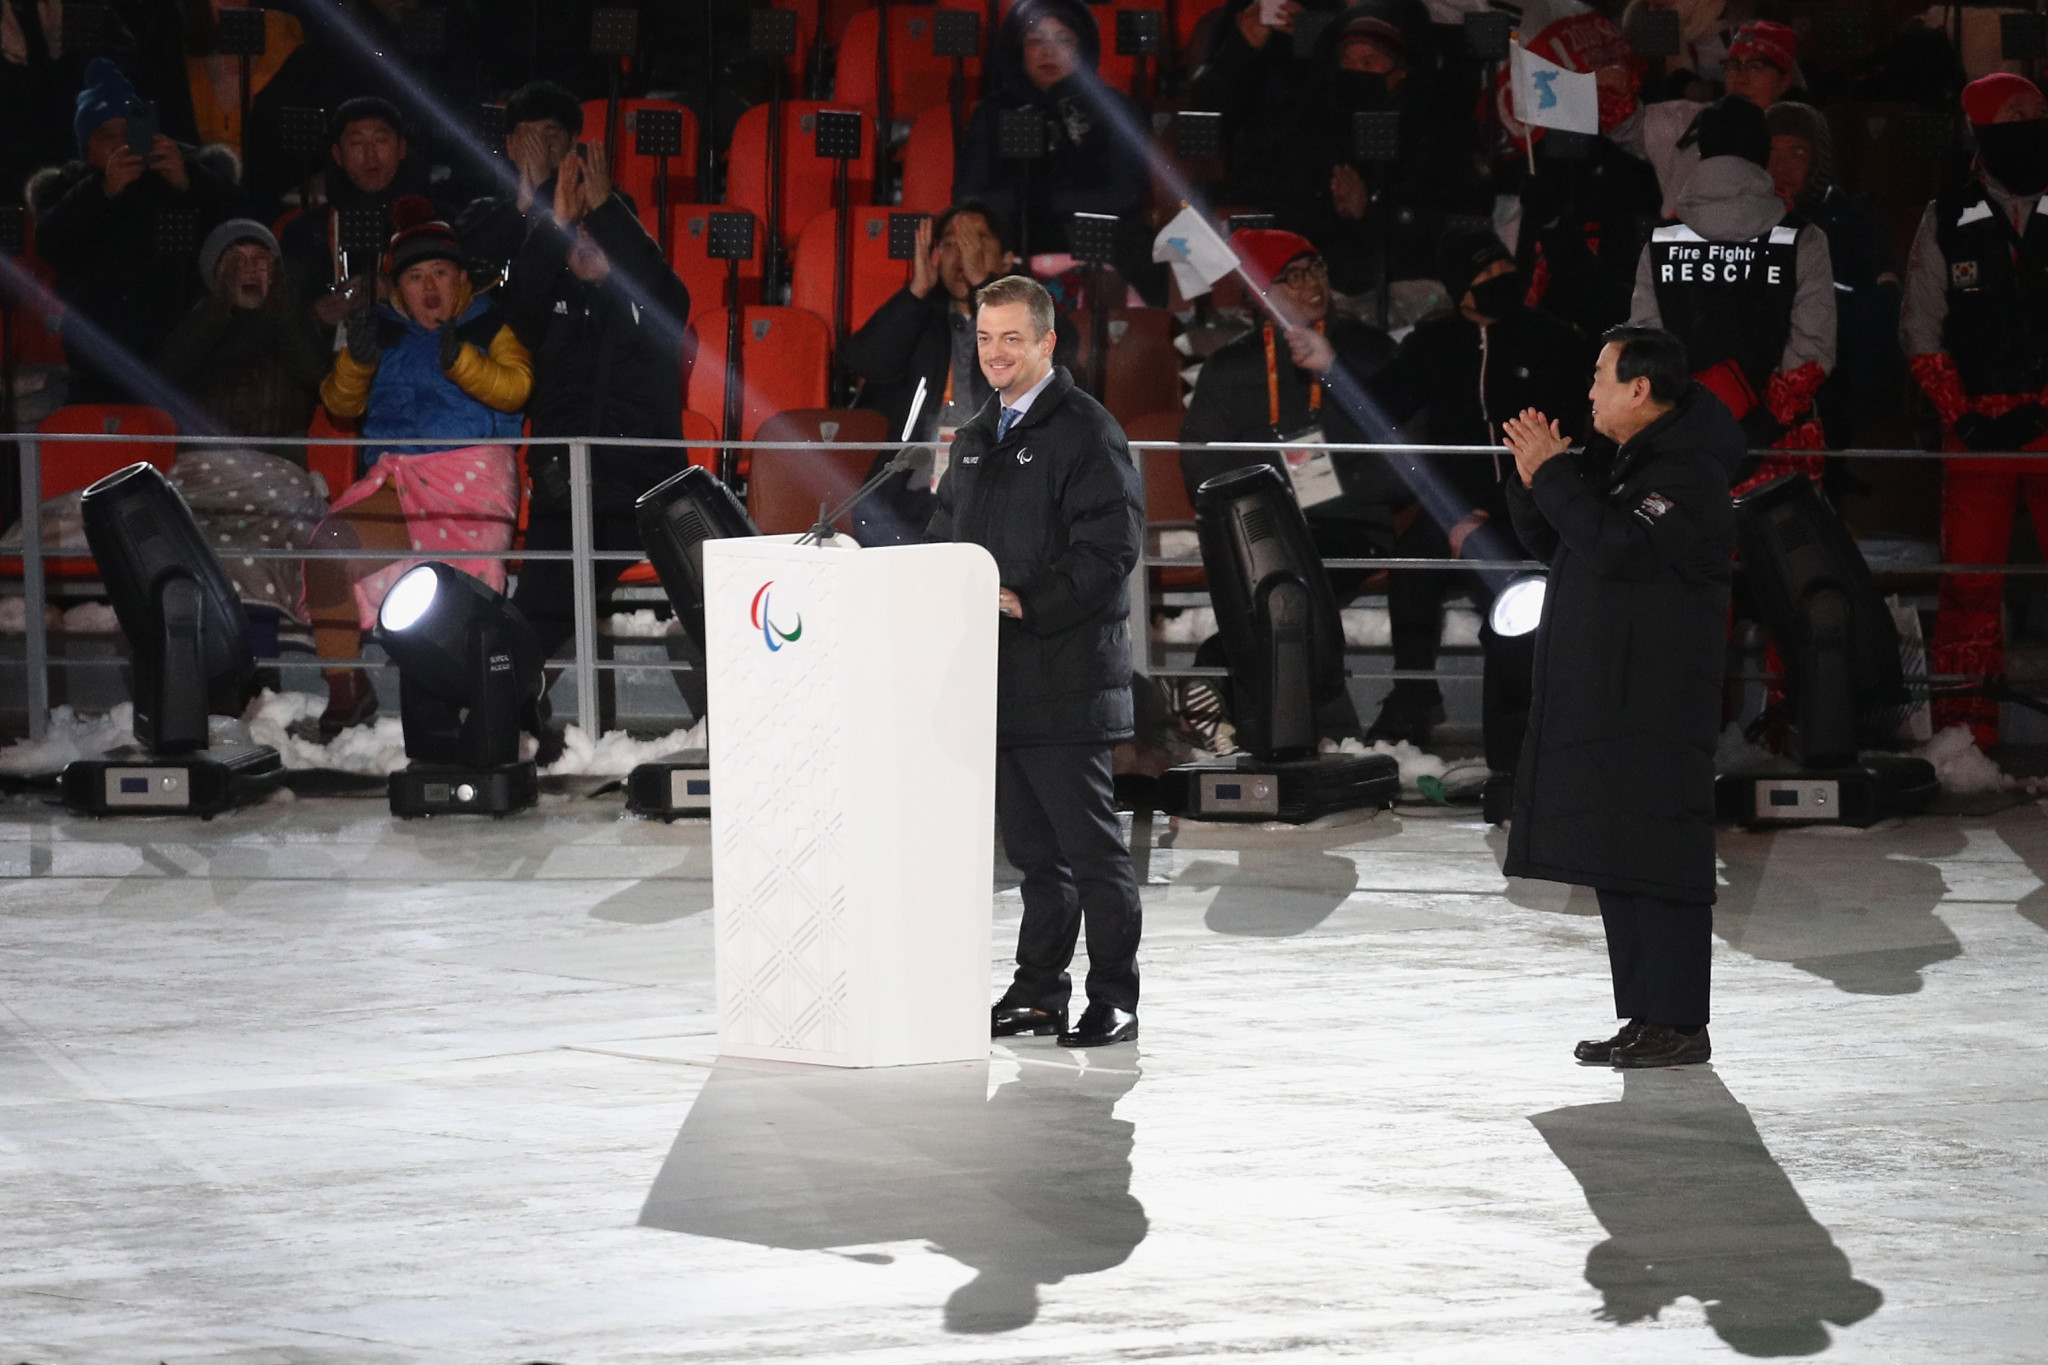 Inspiration was a key theme in the speeches of both IPC President Andrew Parsons and Pyeongchang 2018 President Lee Hee-beom ©Getty Images